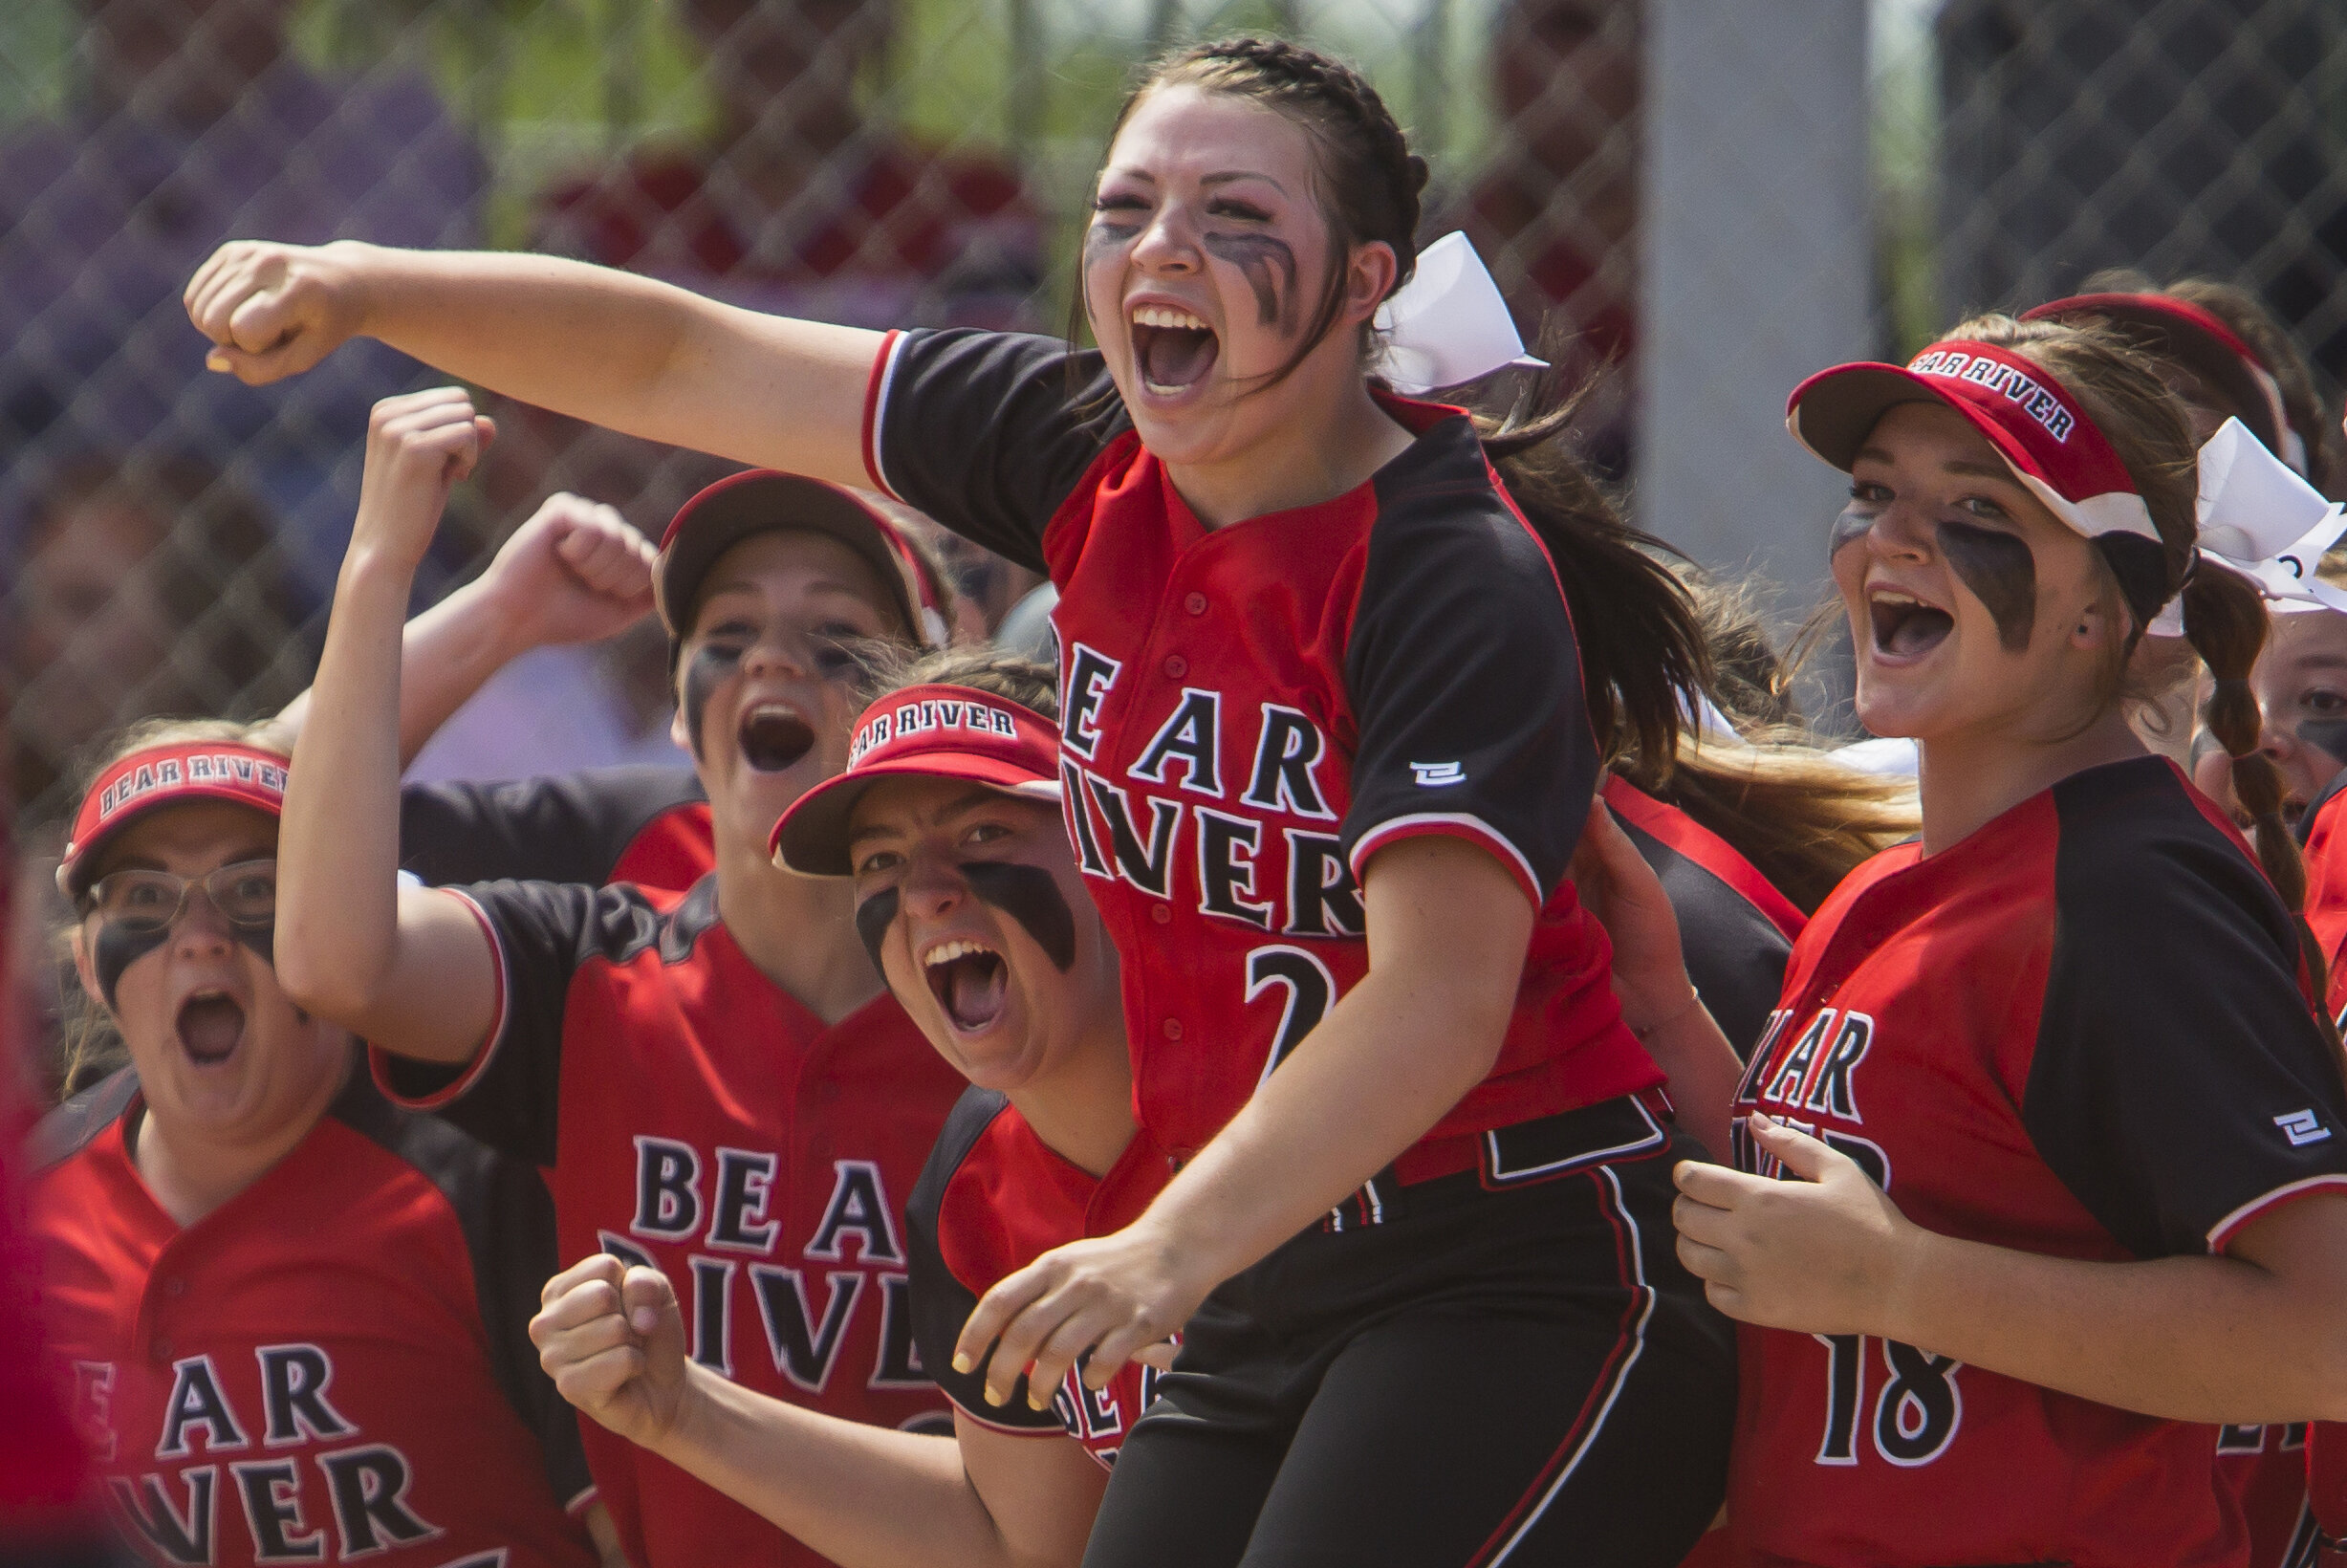  Bear River's Josie Larkin (21), center, cheers with fellow Bears as teammate Taylor Fox (20) makes her way toward home plate near the conclusion of the Bear River Bears' 5-4 win over the Spanish Fork Mighty Dons in the Class 4A state championship at